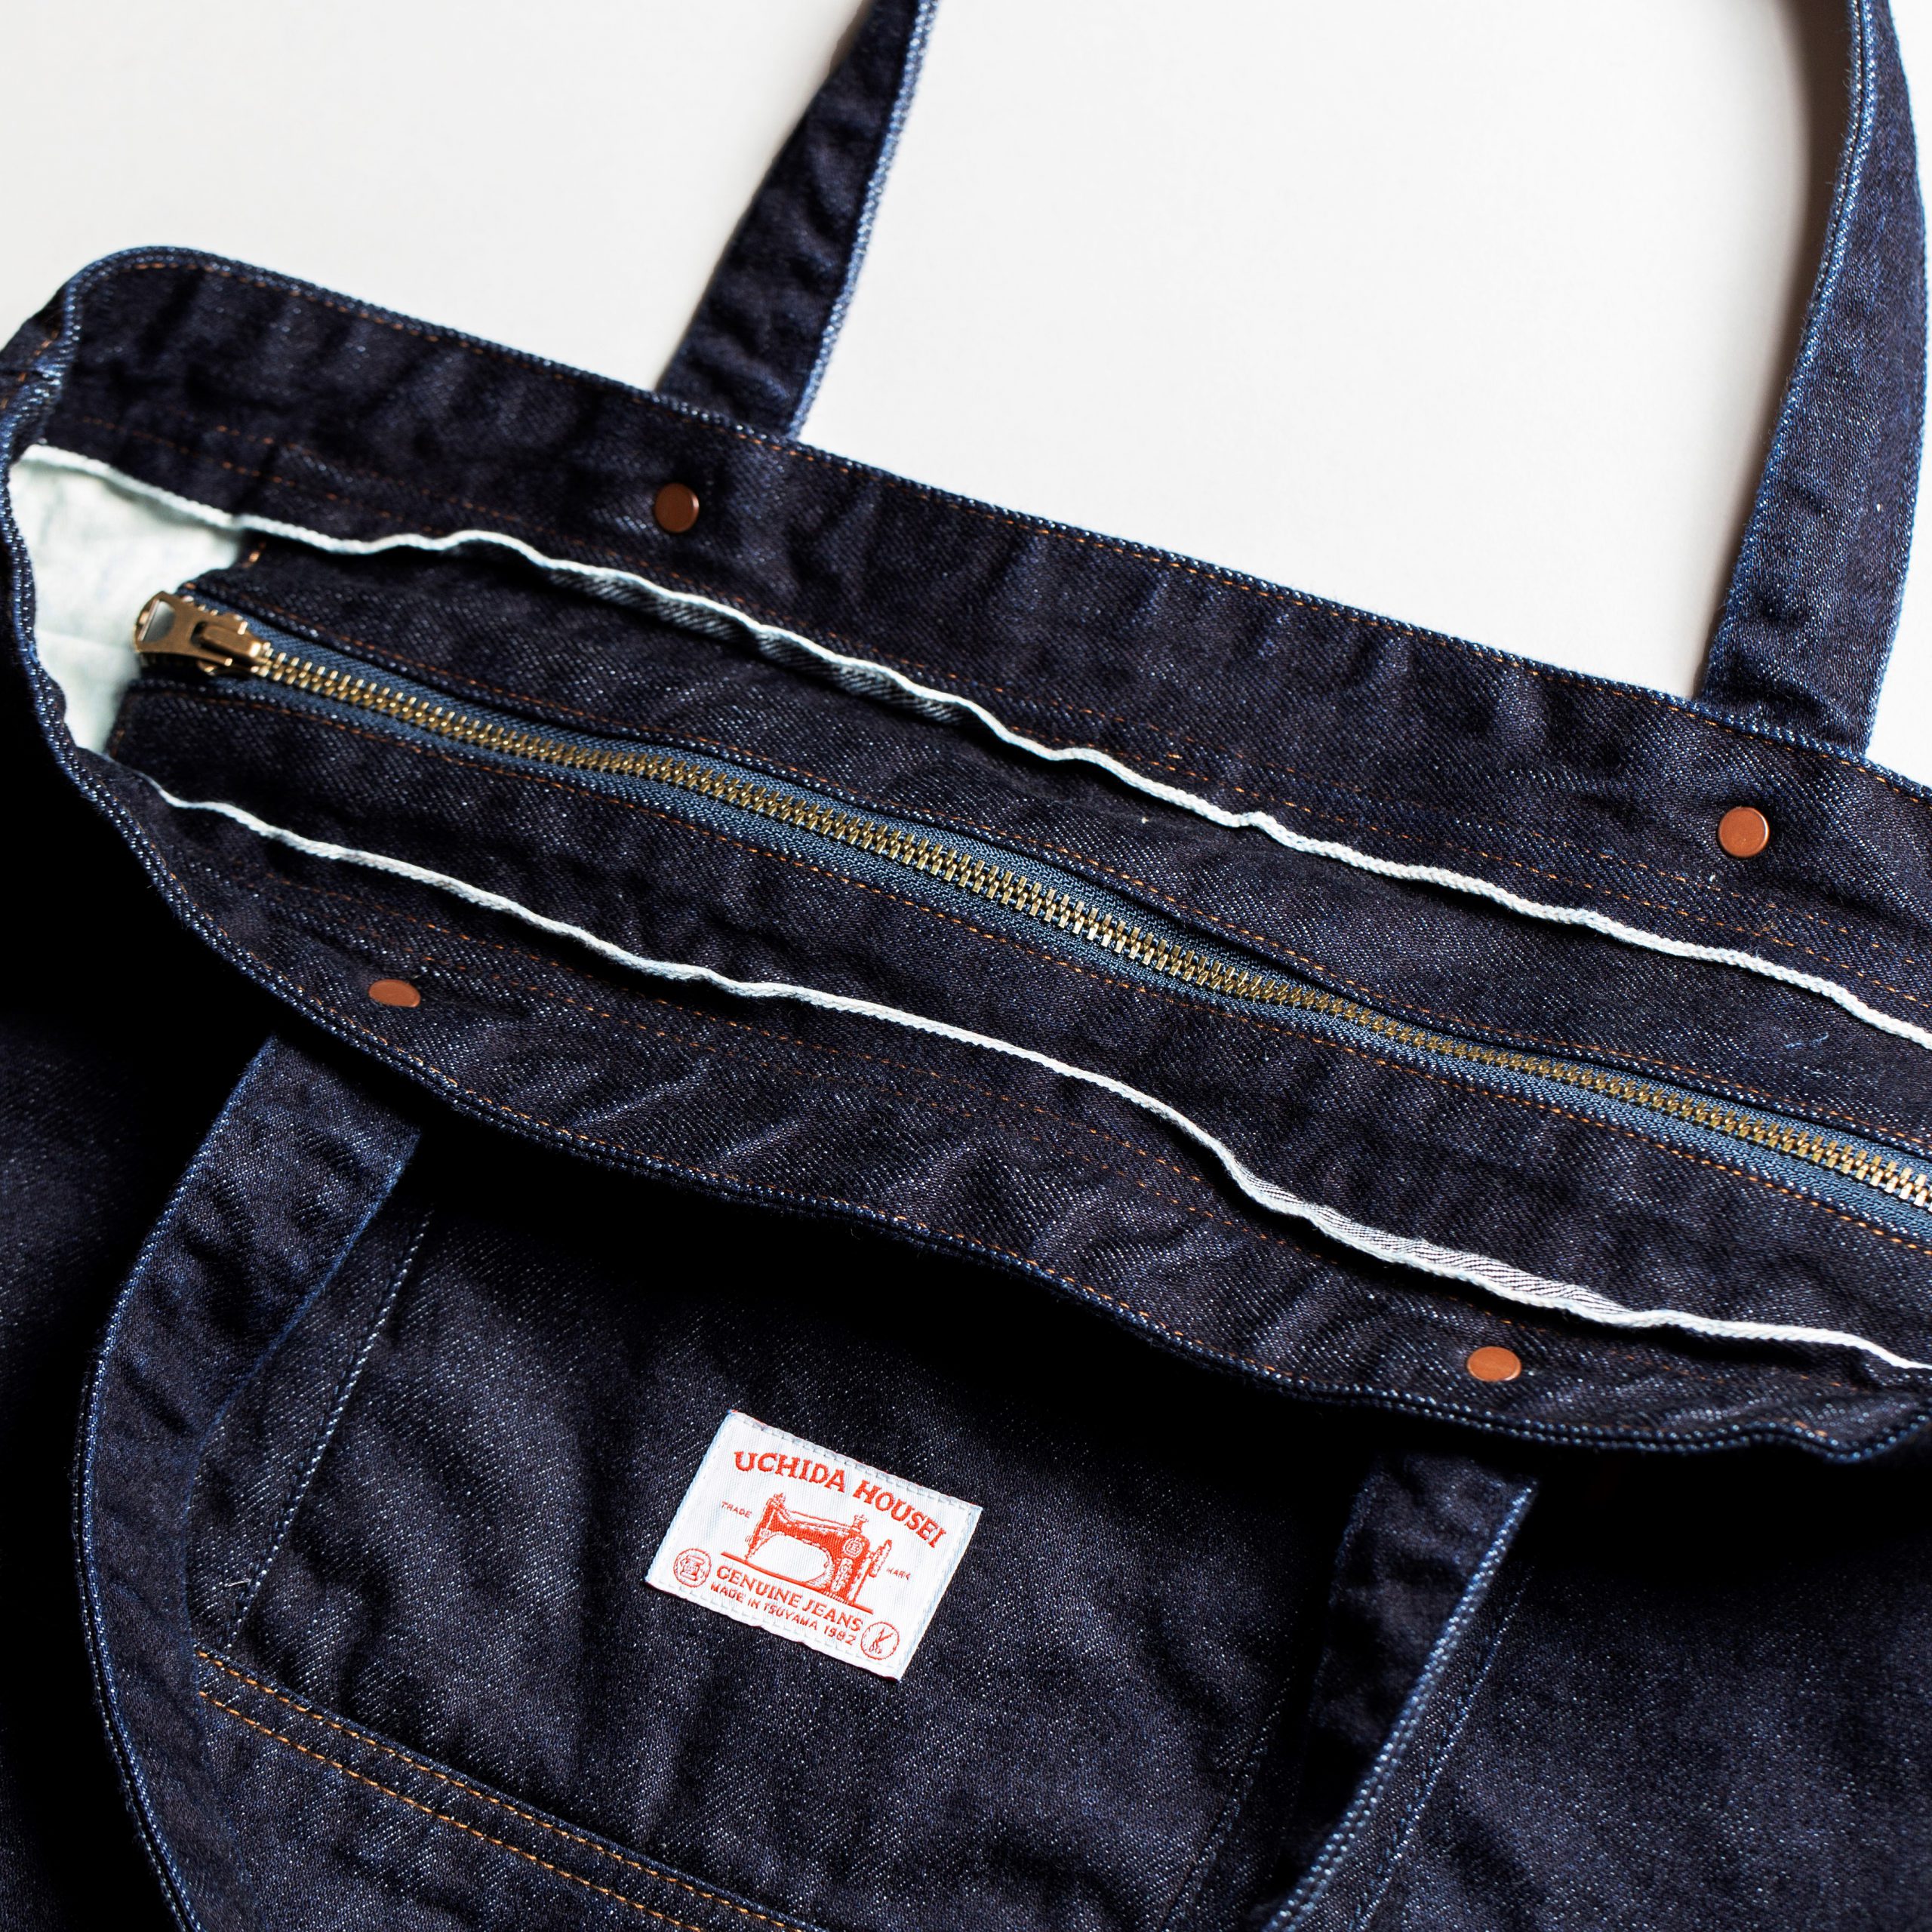 SELVEDGE DENIM CARRY-ON TOTE  BAG OW【セルヴィッジ デニム キャリーオン トートバッグ OW】